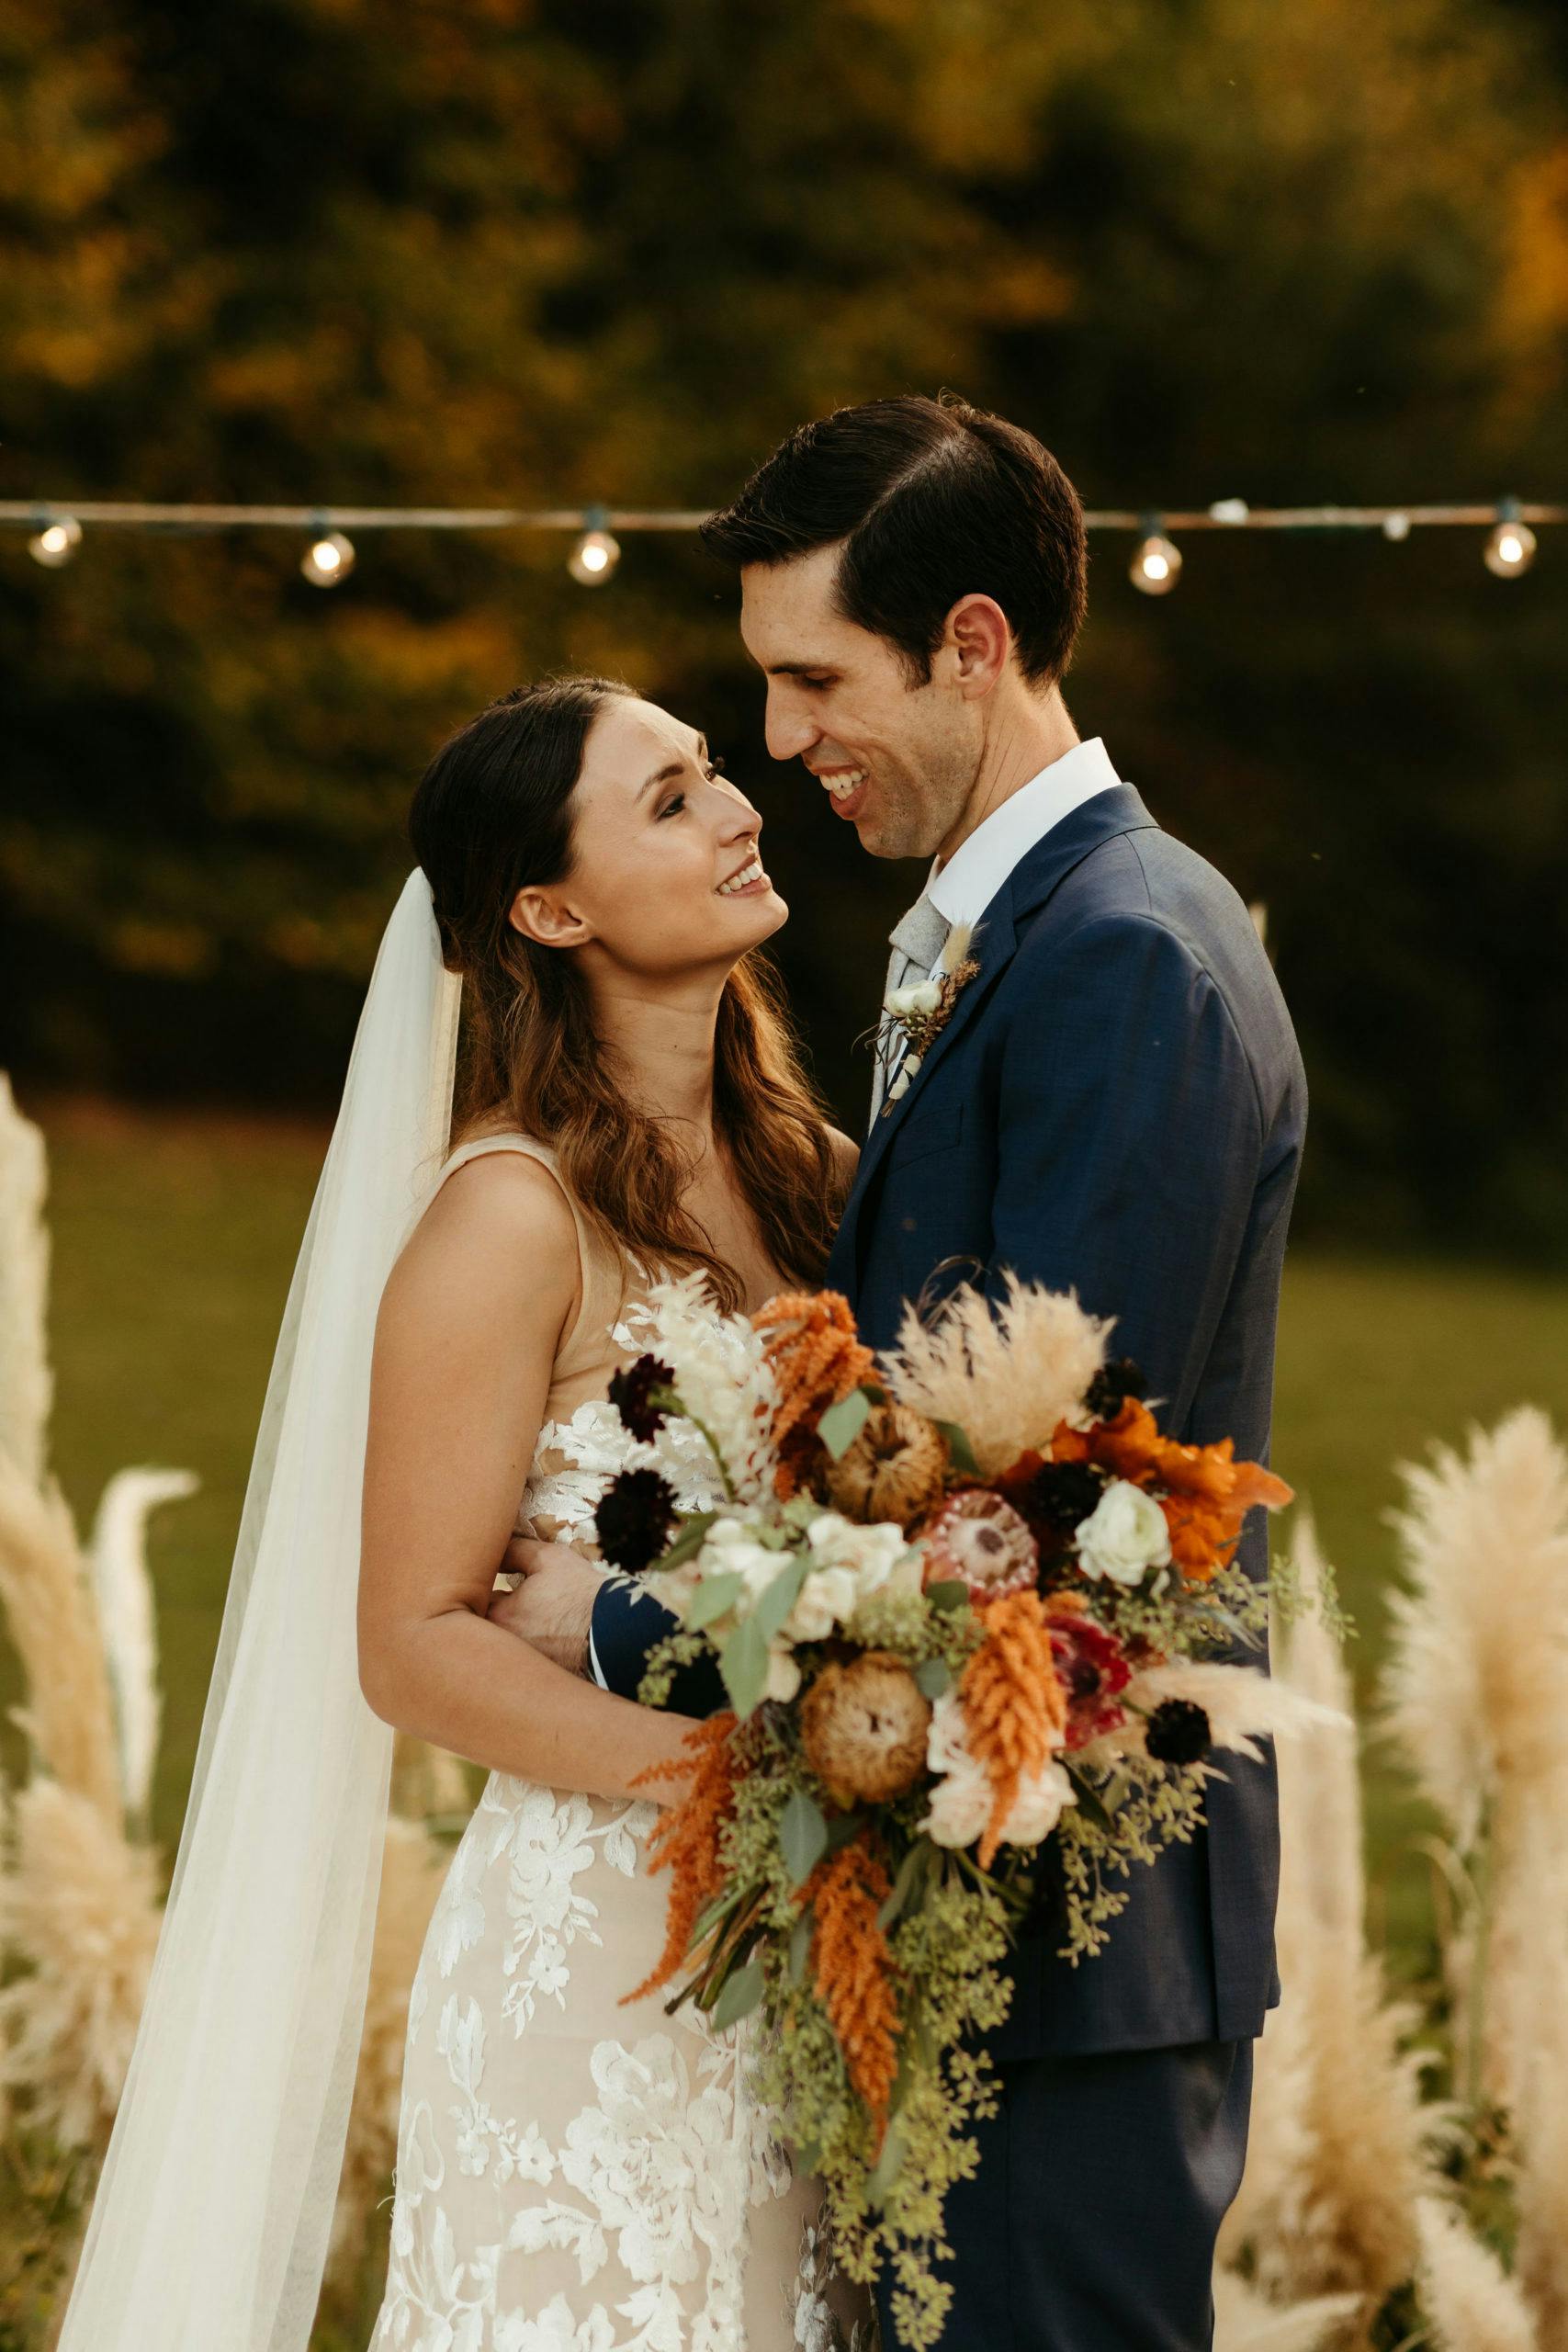 Charming Boho Rustic Chic Wedding at Under Canvas Great Smokey Mountains in Tennessee